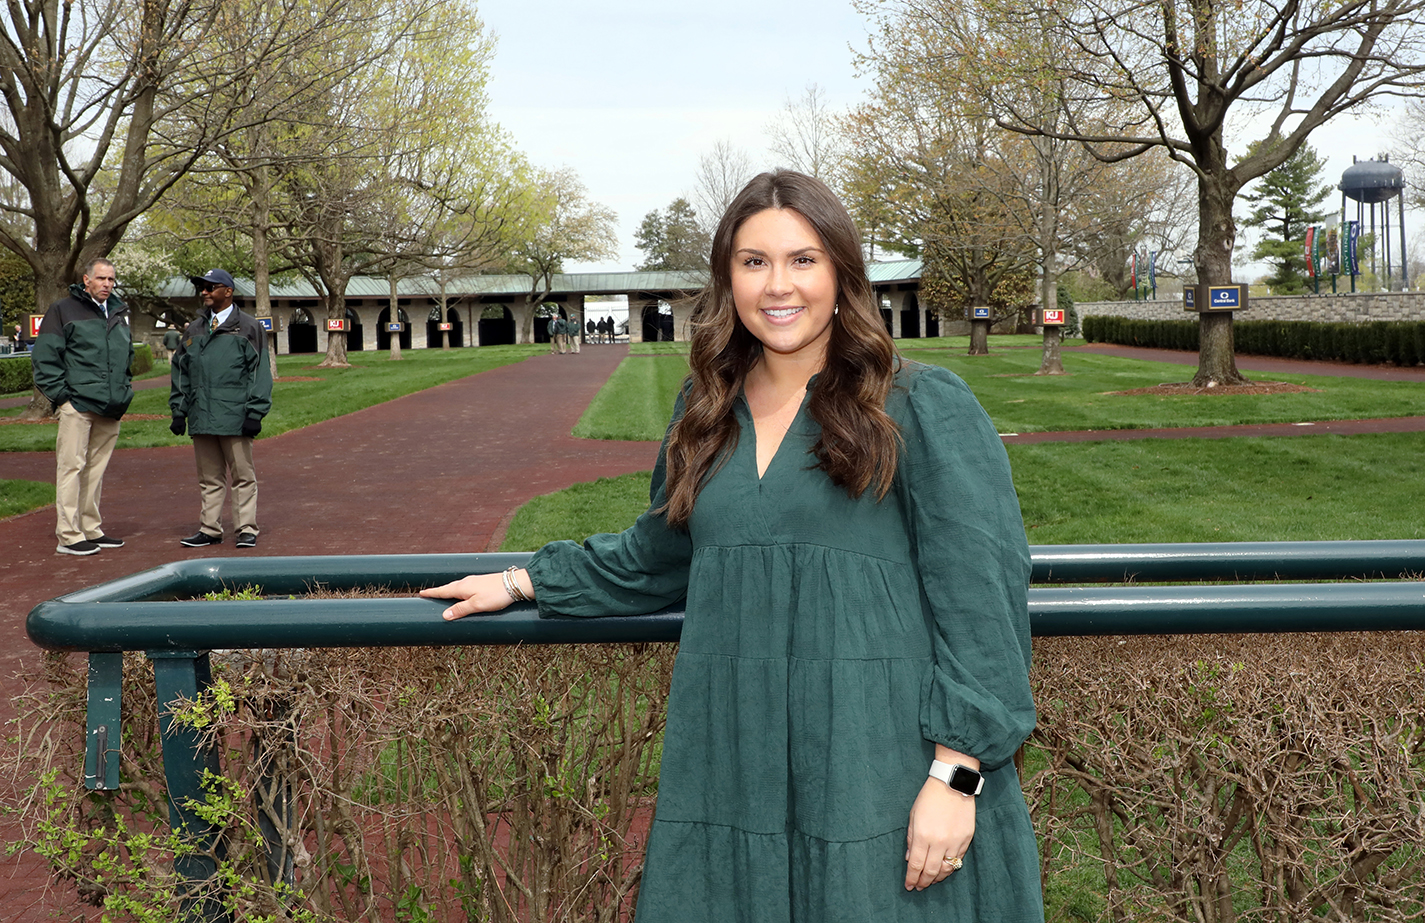 Student opportunities at Keeneland a starting gate for Transylvania alumna